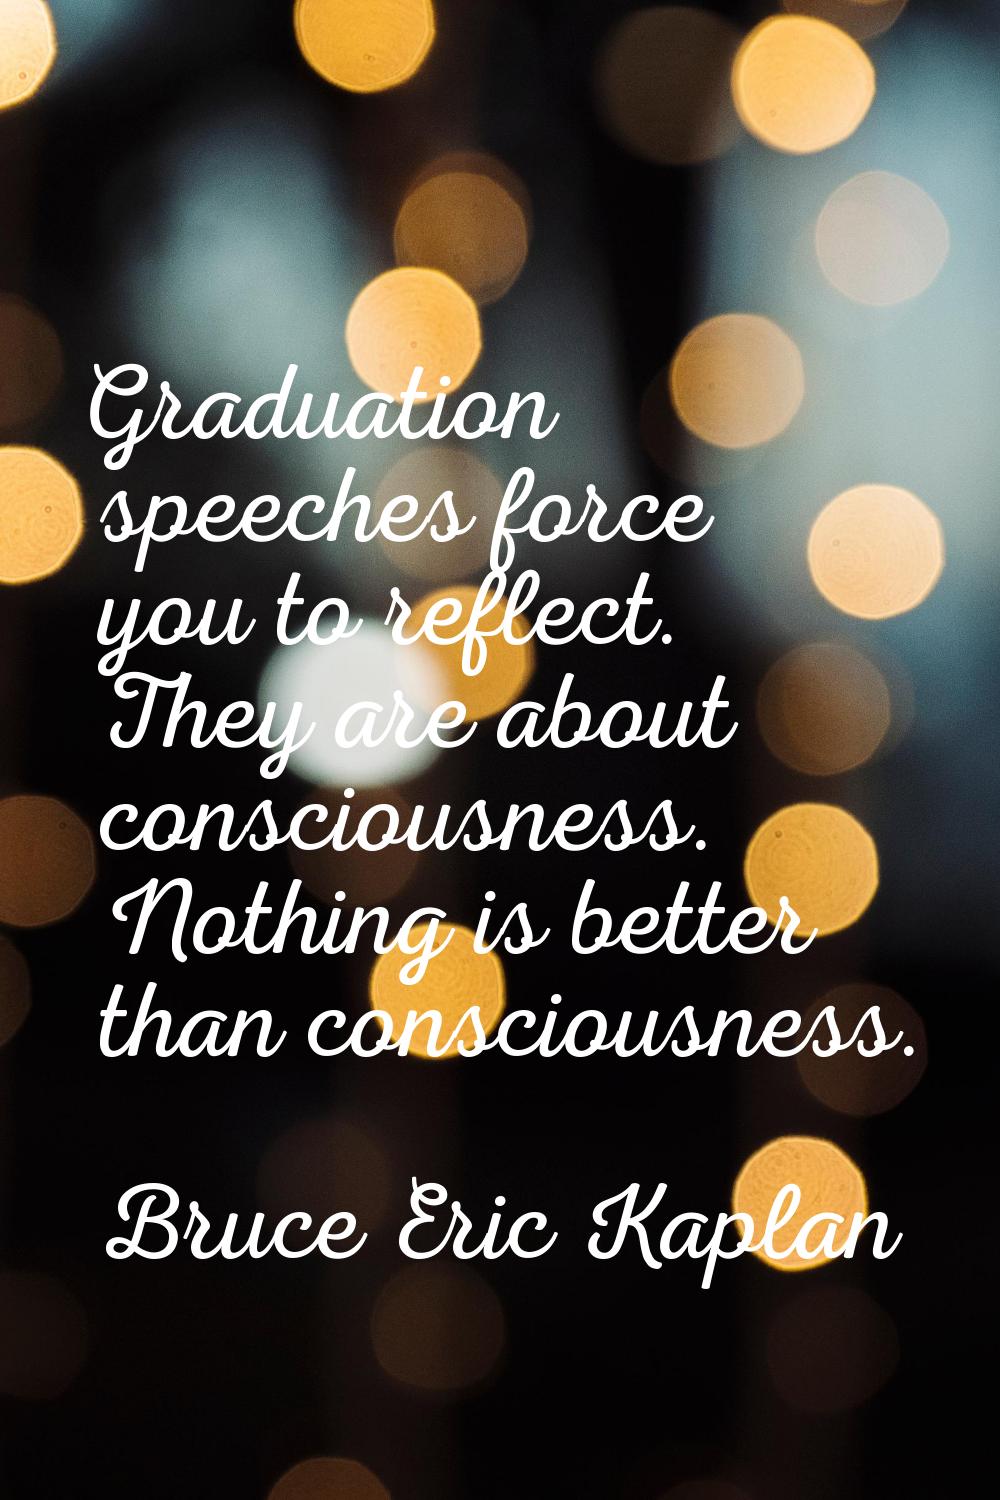 Graduation speeches force you to reflect. They are about consciousness. Nothing is better than cons